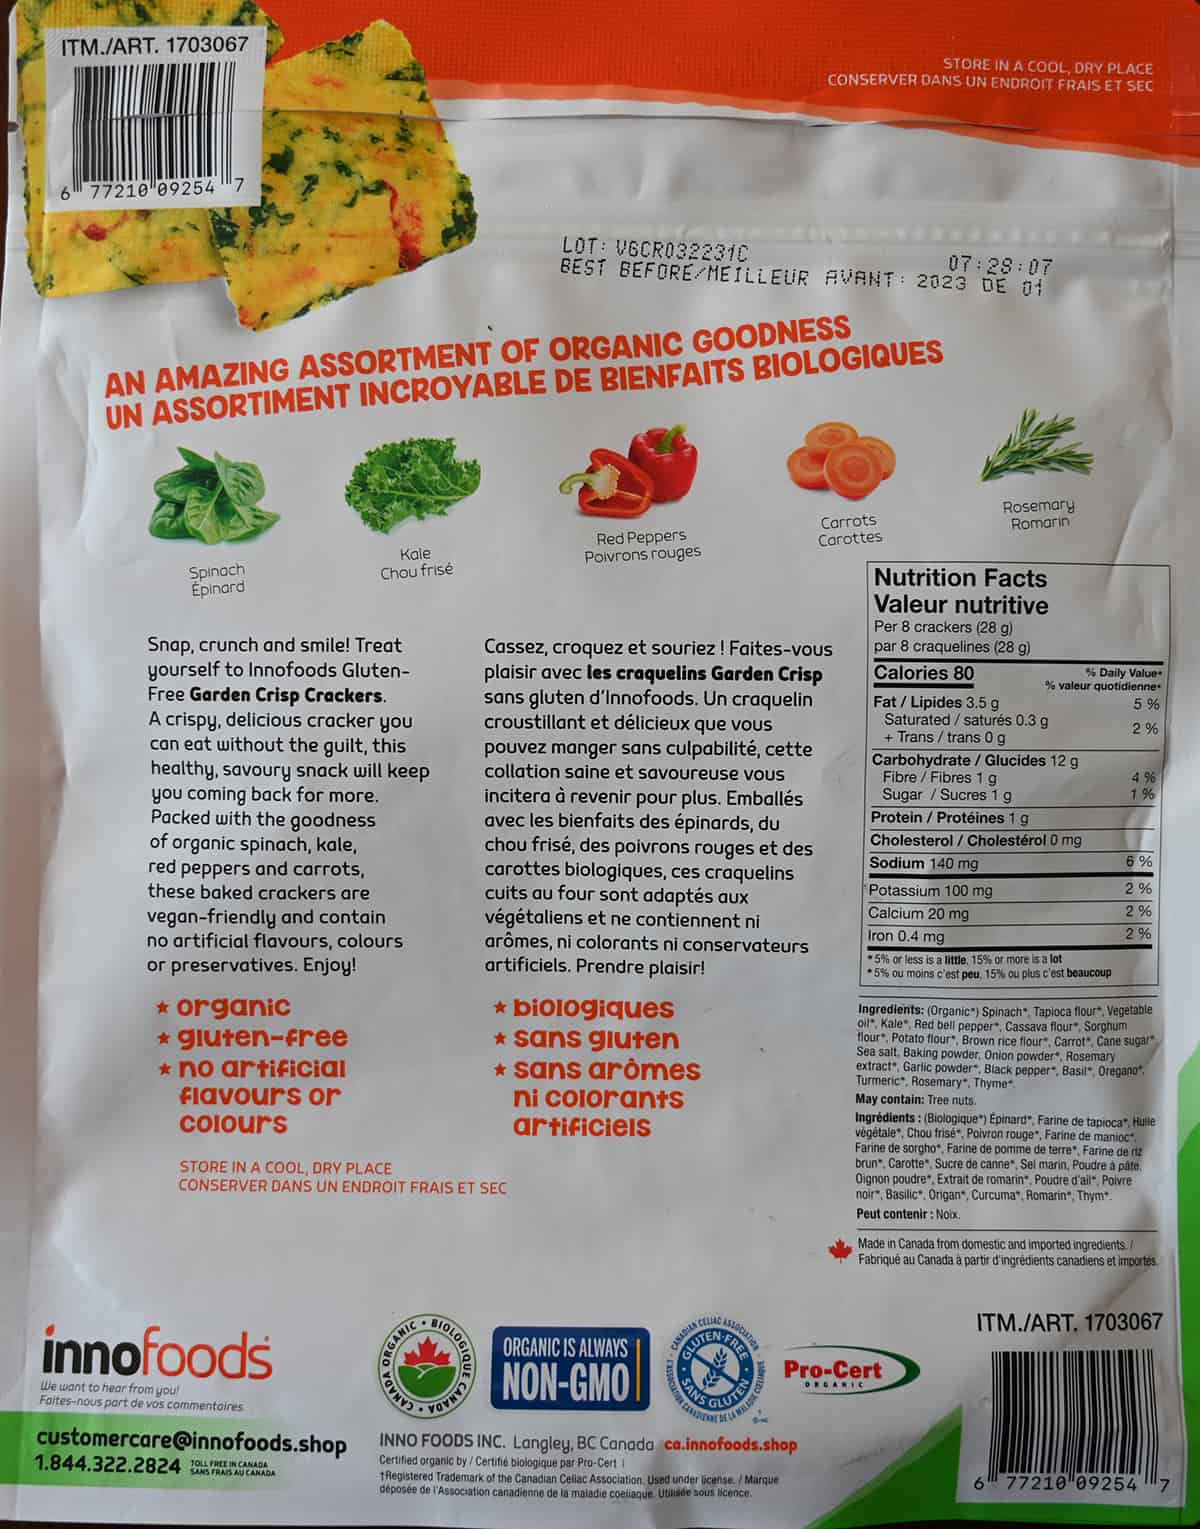 Image of the back of the bag of crackers showing they're gluten-free, organic and have no artificial flavors or colors.